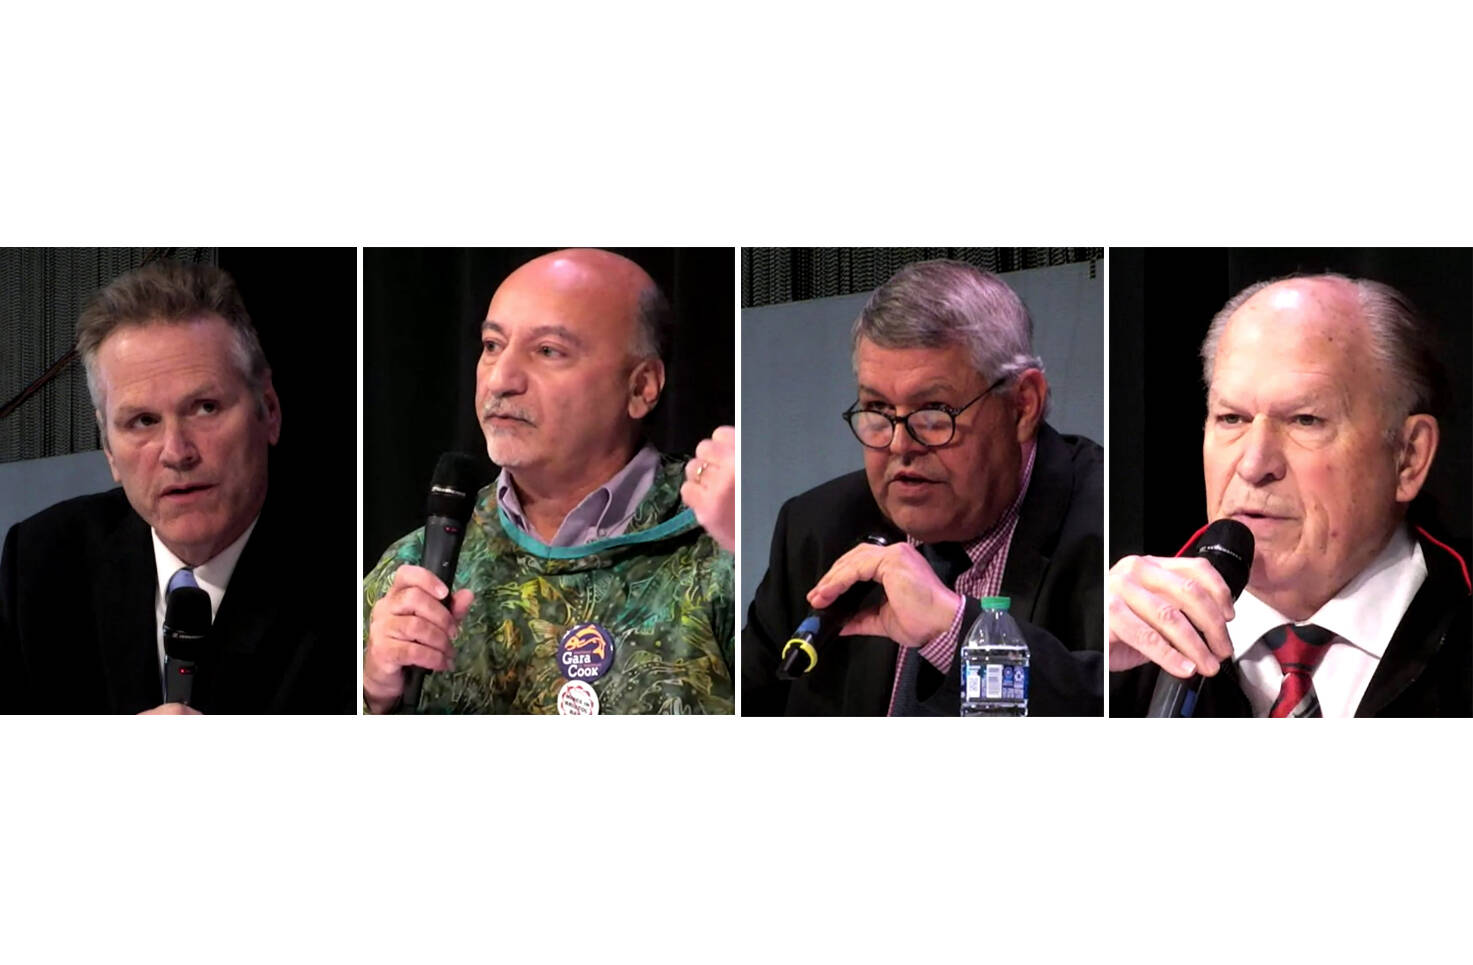 This combination image consisting of screenshots from the AFN convention livestream shows the four gubernatorial candidates who will appear on statewide ballots, Republican Gov. Mike Dunleavy, Democratic former state Rep. Les Gara, Republican former Kenai Peninsula Borough Mayor Charlie Pierce and independent former Gov. Bill Walker. (Screenshots)